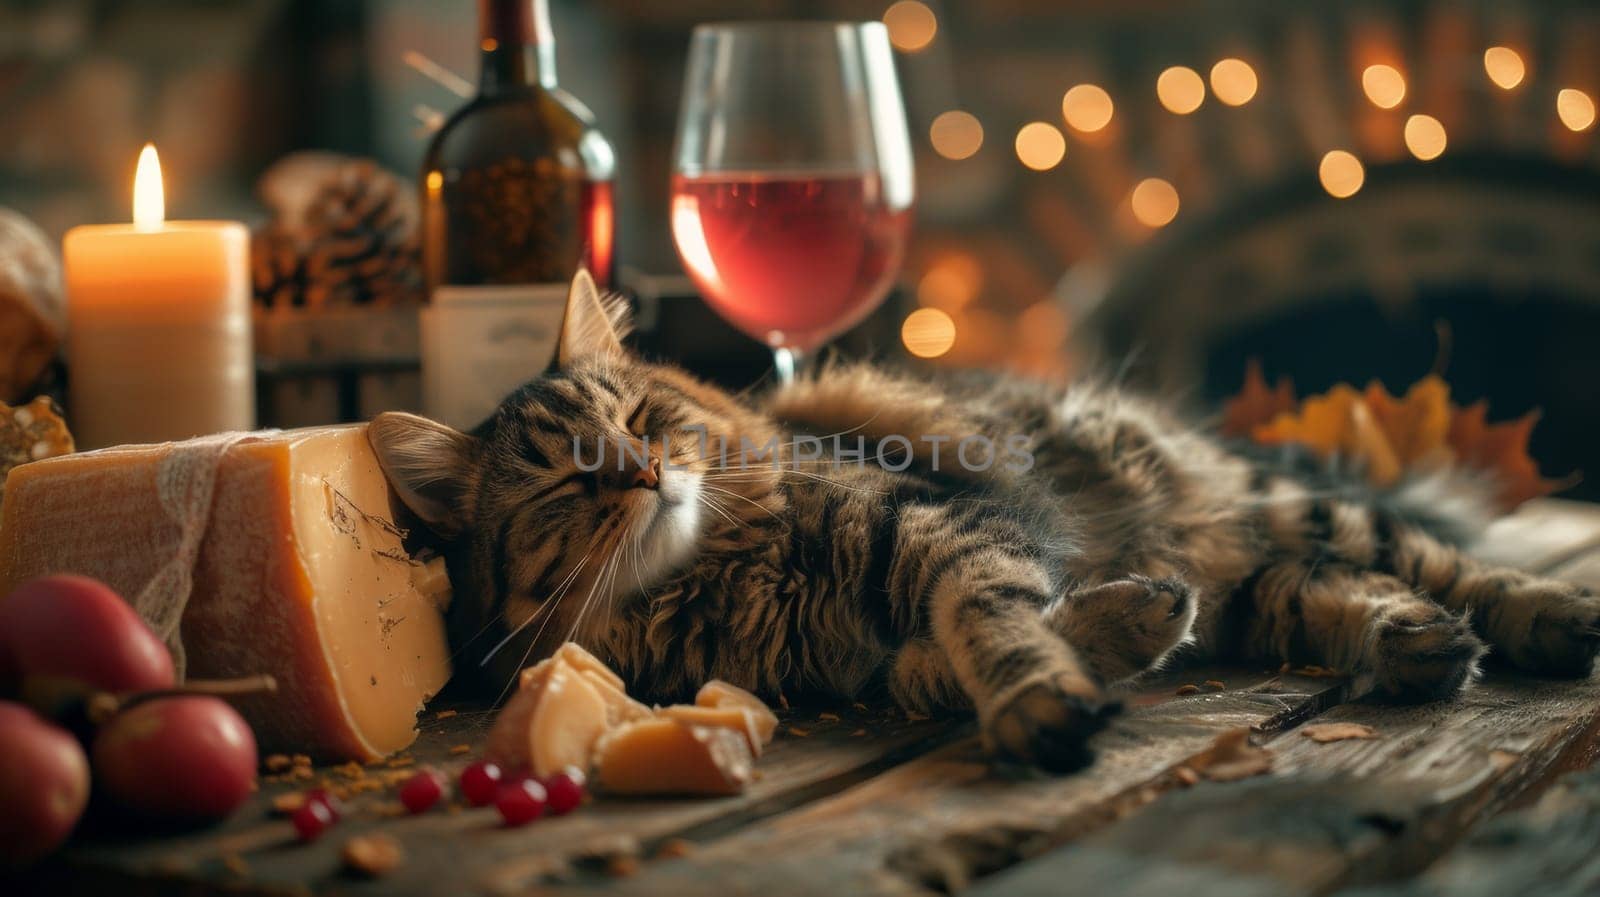 A cat laying on a table next to cheese and wine